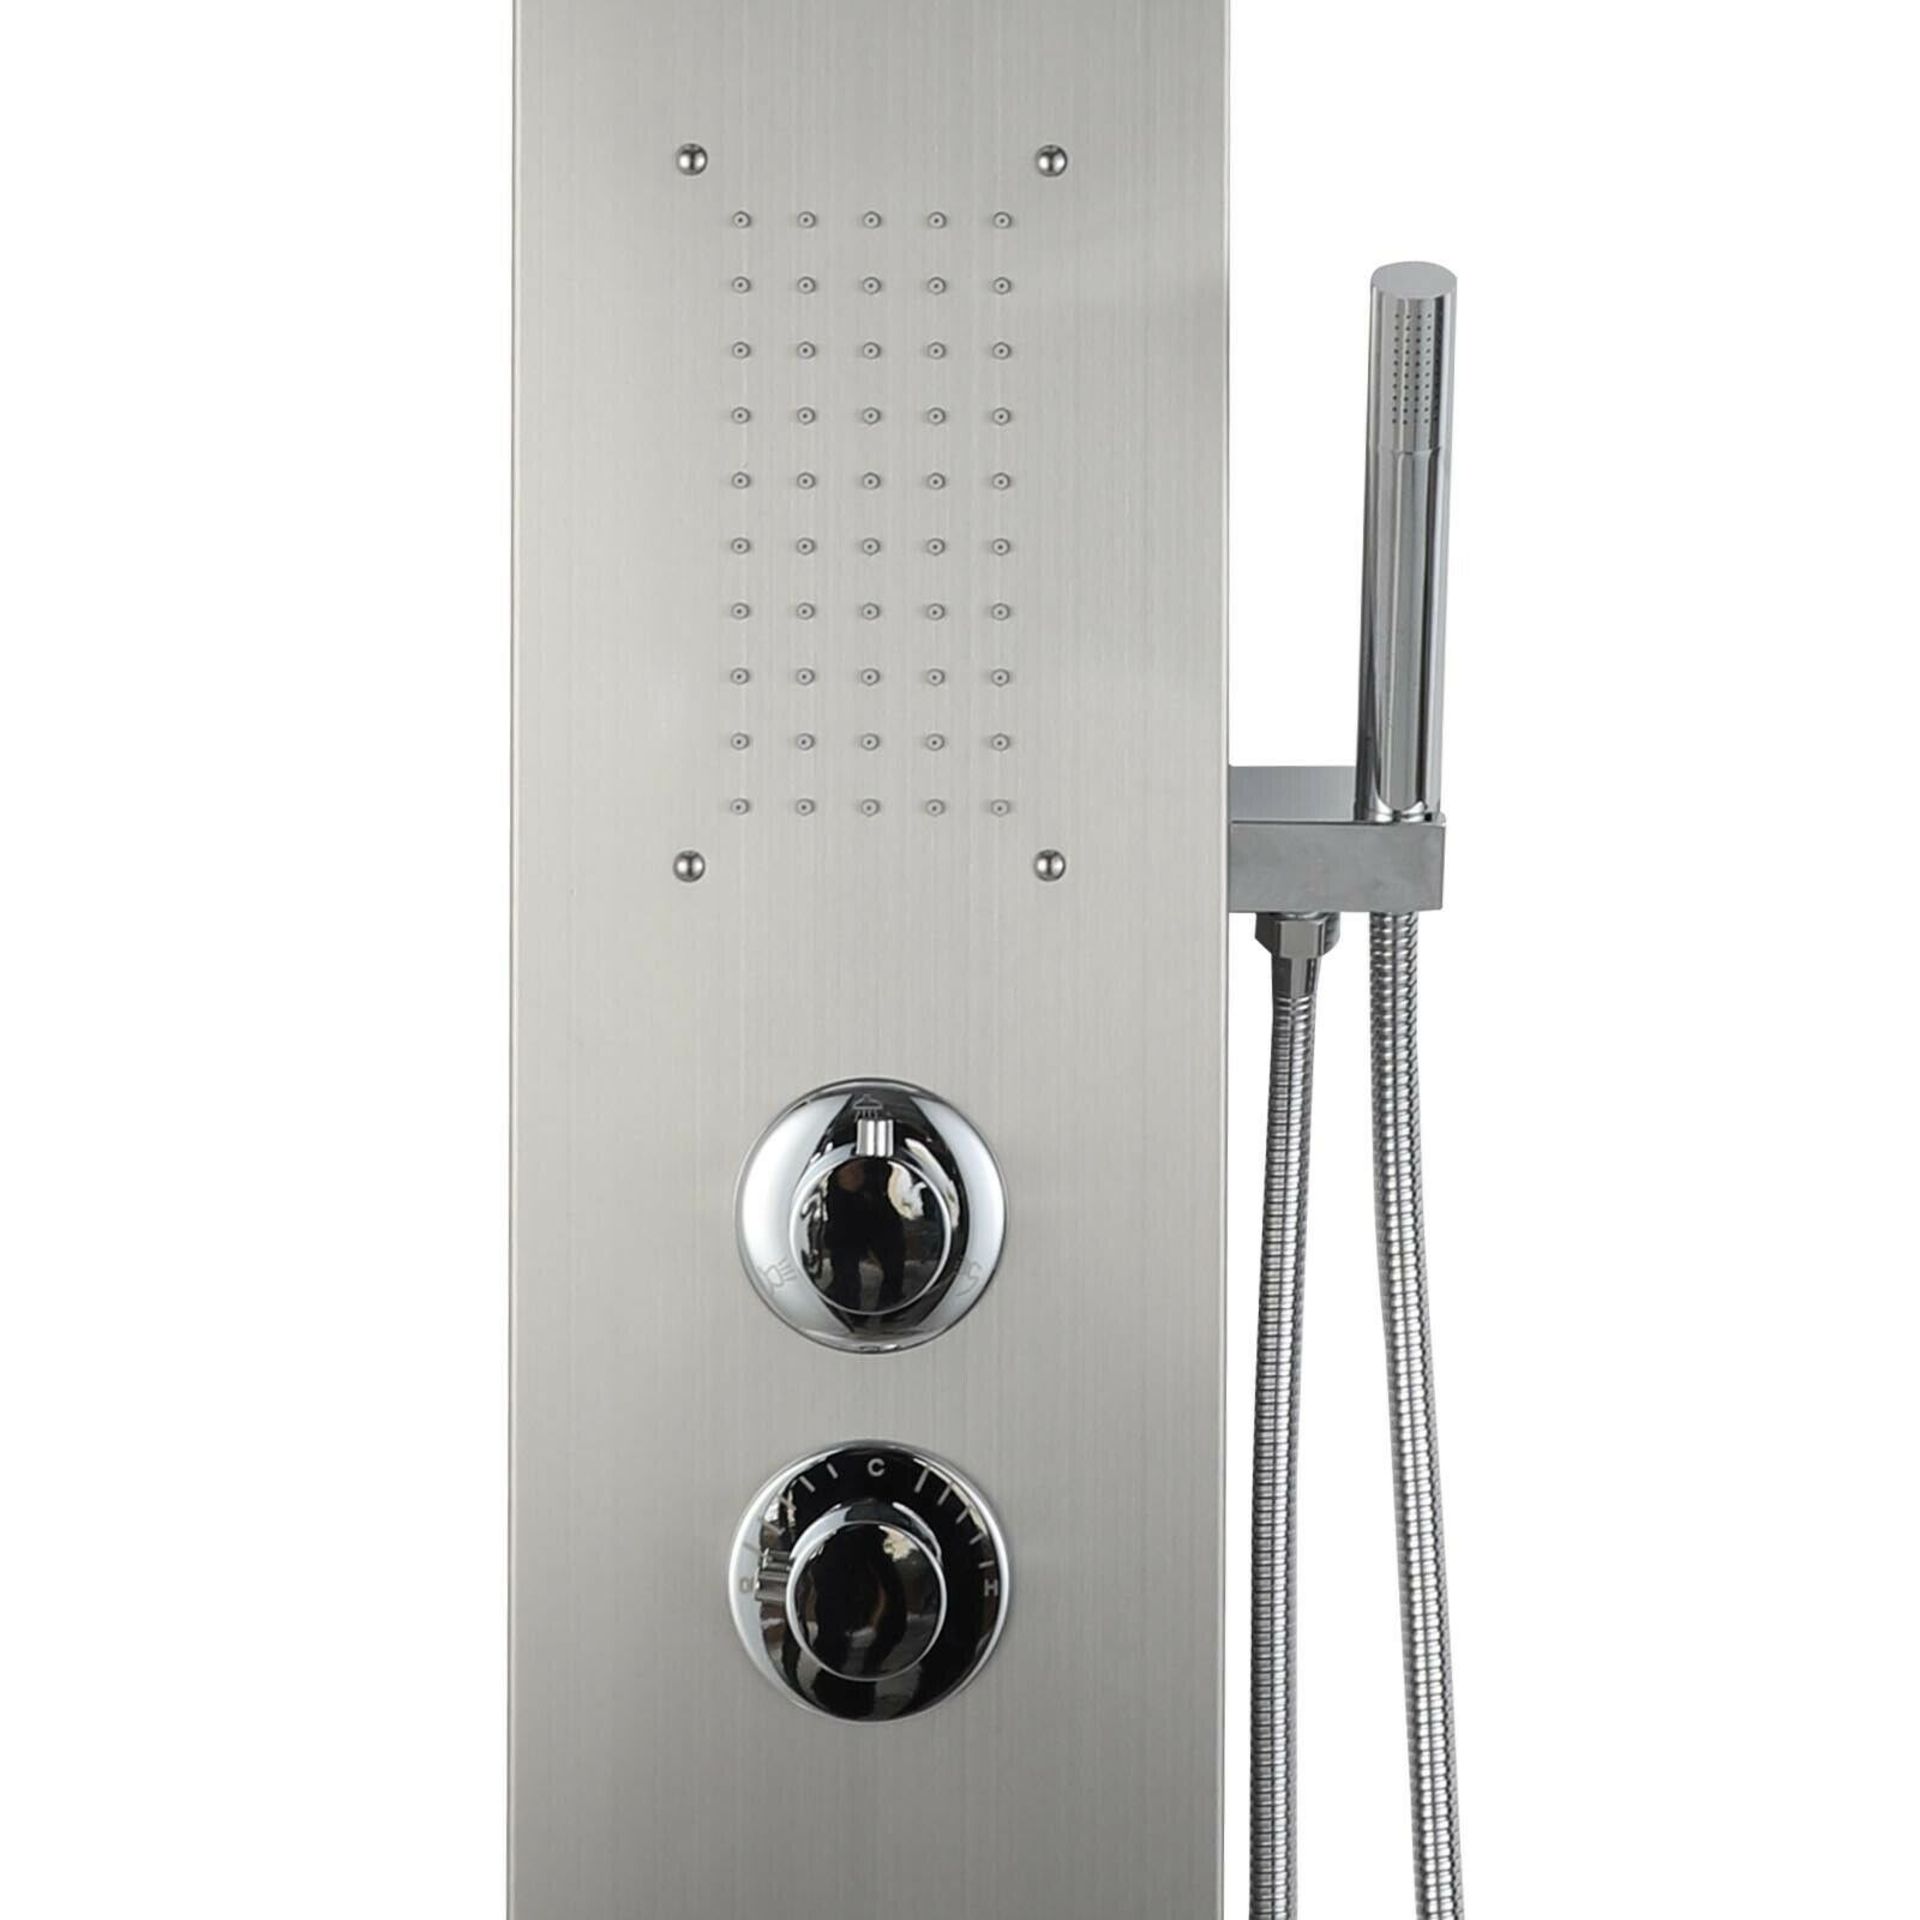 (DE41) Chrome Modern Bathroom Shower Column Tower Panel System With Hand held Massage Jets. RRP... - Image 3 of 4